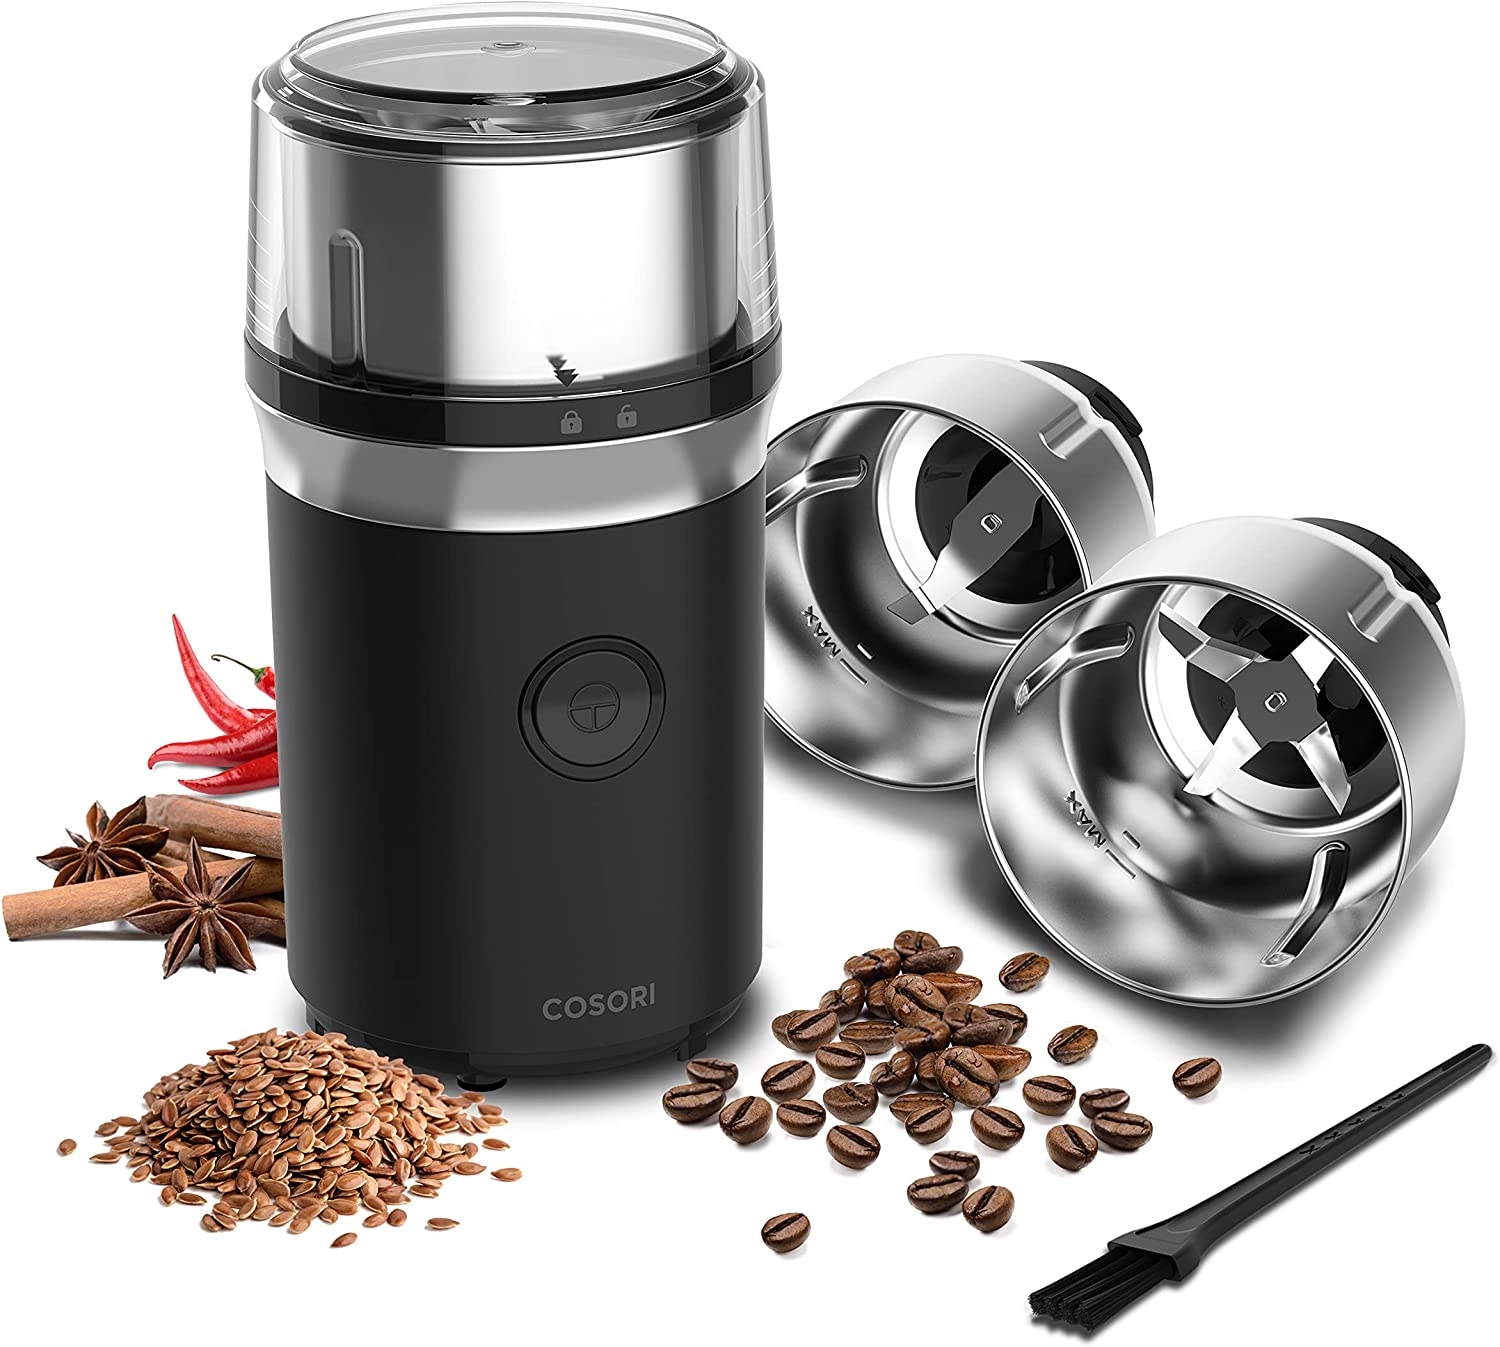 COSORI Electric Coffee Grinders for Spices, Seeds, Herbs, and Coffee Beans, Spice Blender and Espresso Grinder, Wet and Dry